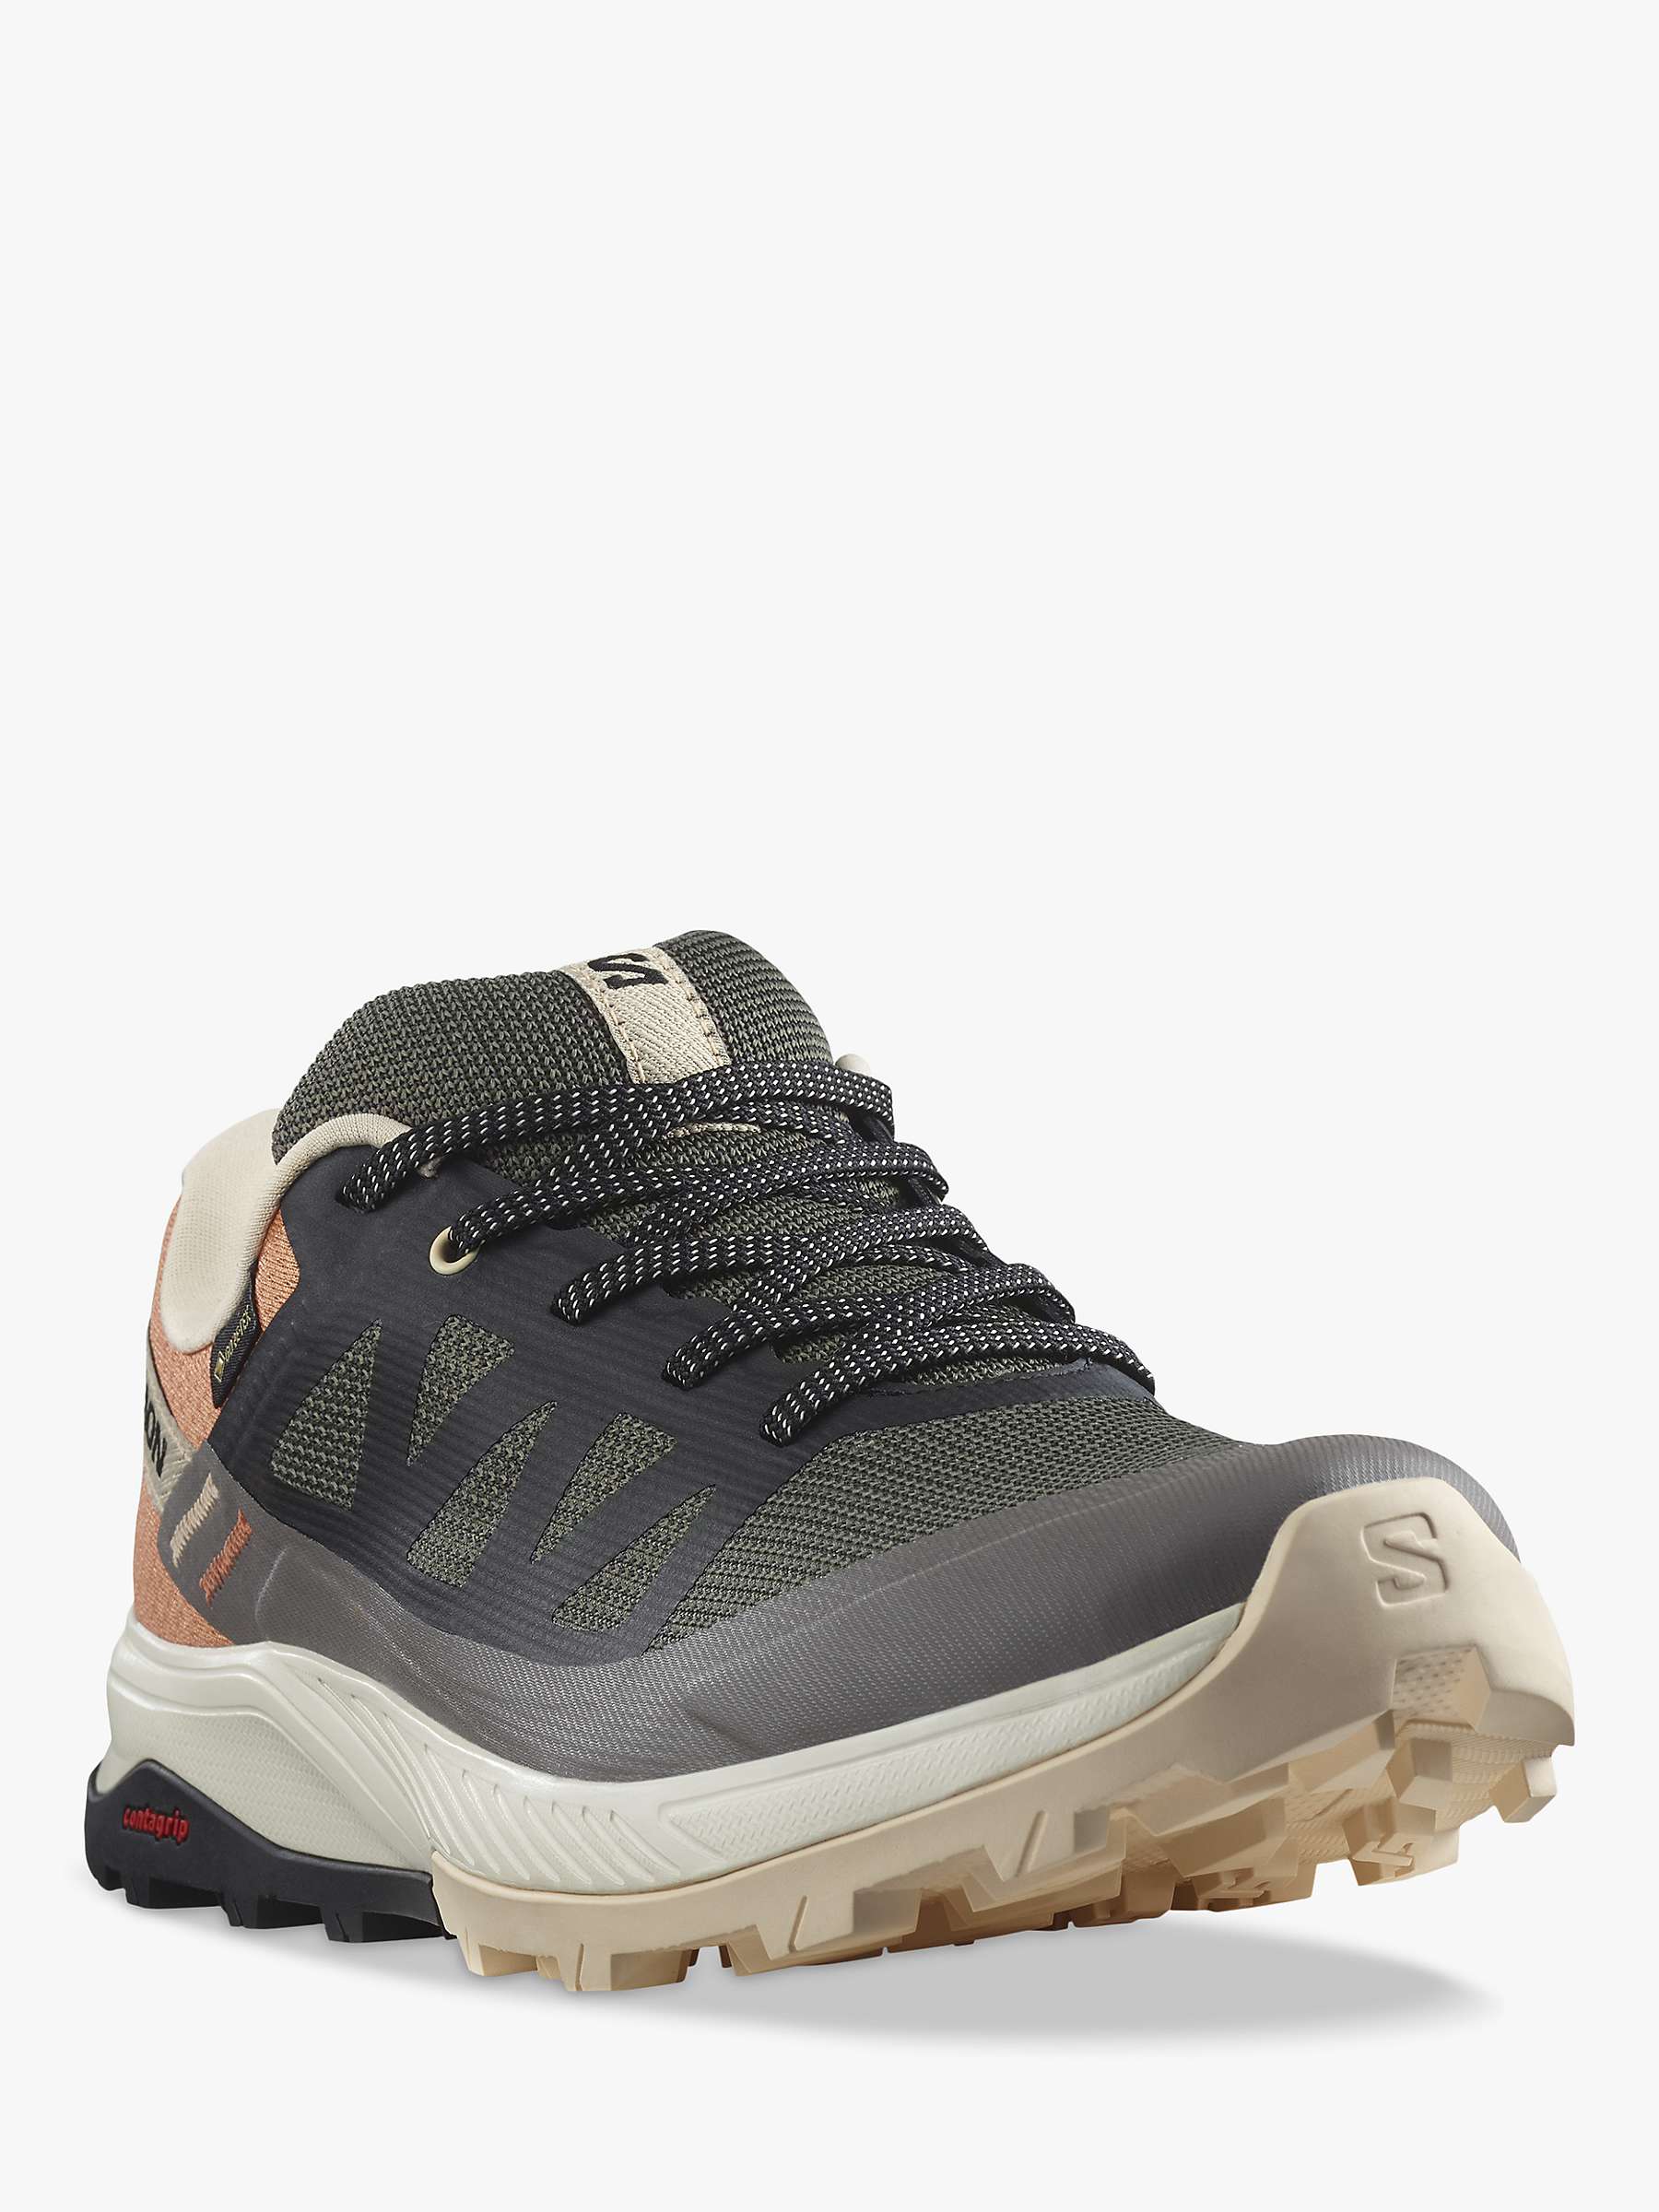 Buy Salomon Outrise Women's Waterproof Gore-Tex Hiking Shoes Online at johnlewis.com